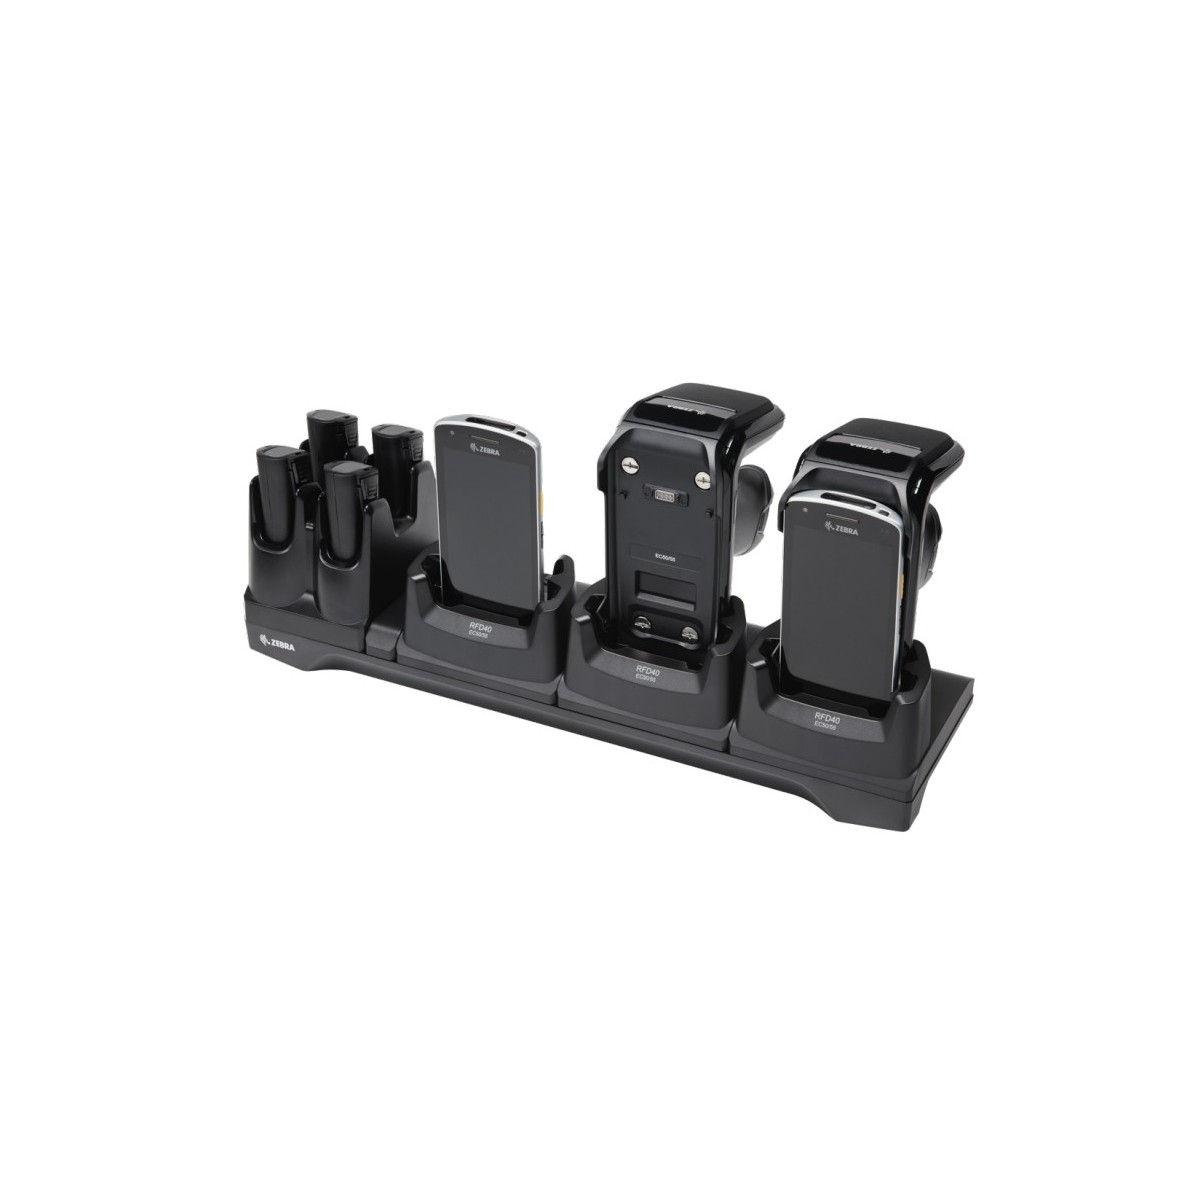 Zebra RFD40 3 DEVICE SLOTS-4 TOASTER SLOTS COMMUNICATION CRADLE WITH SUPPORT FOR EC50-55.